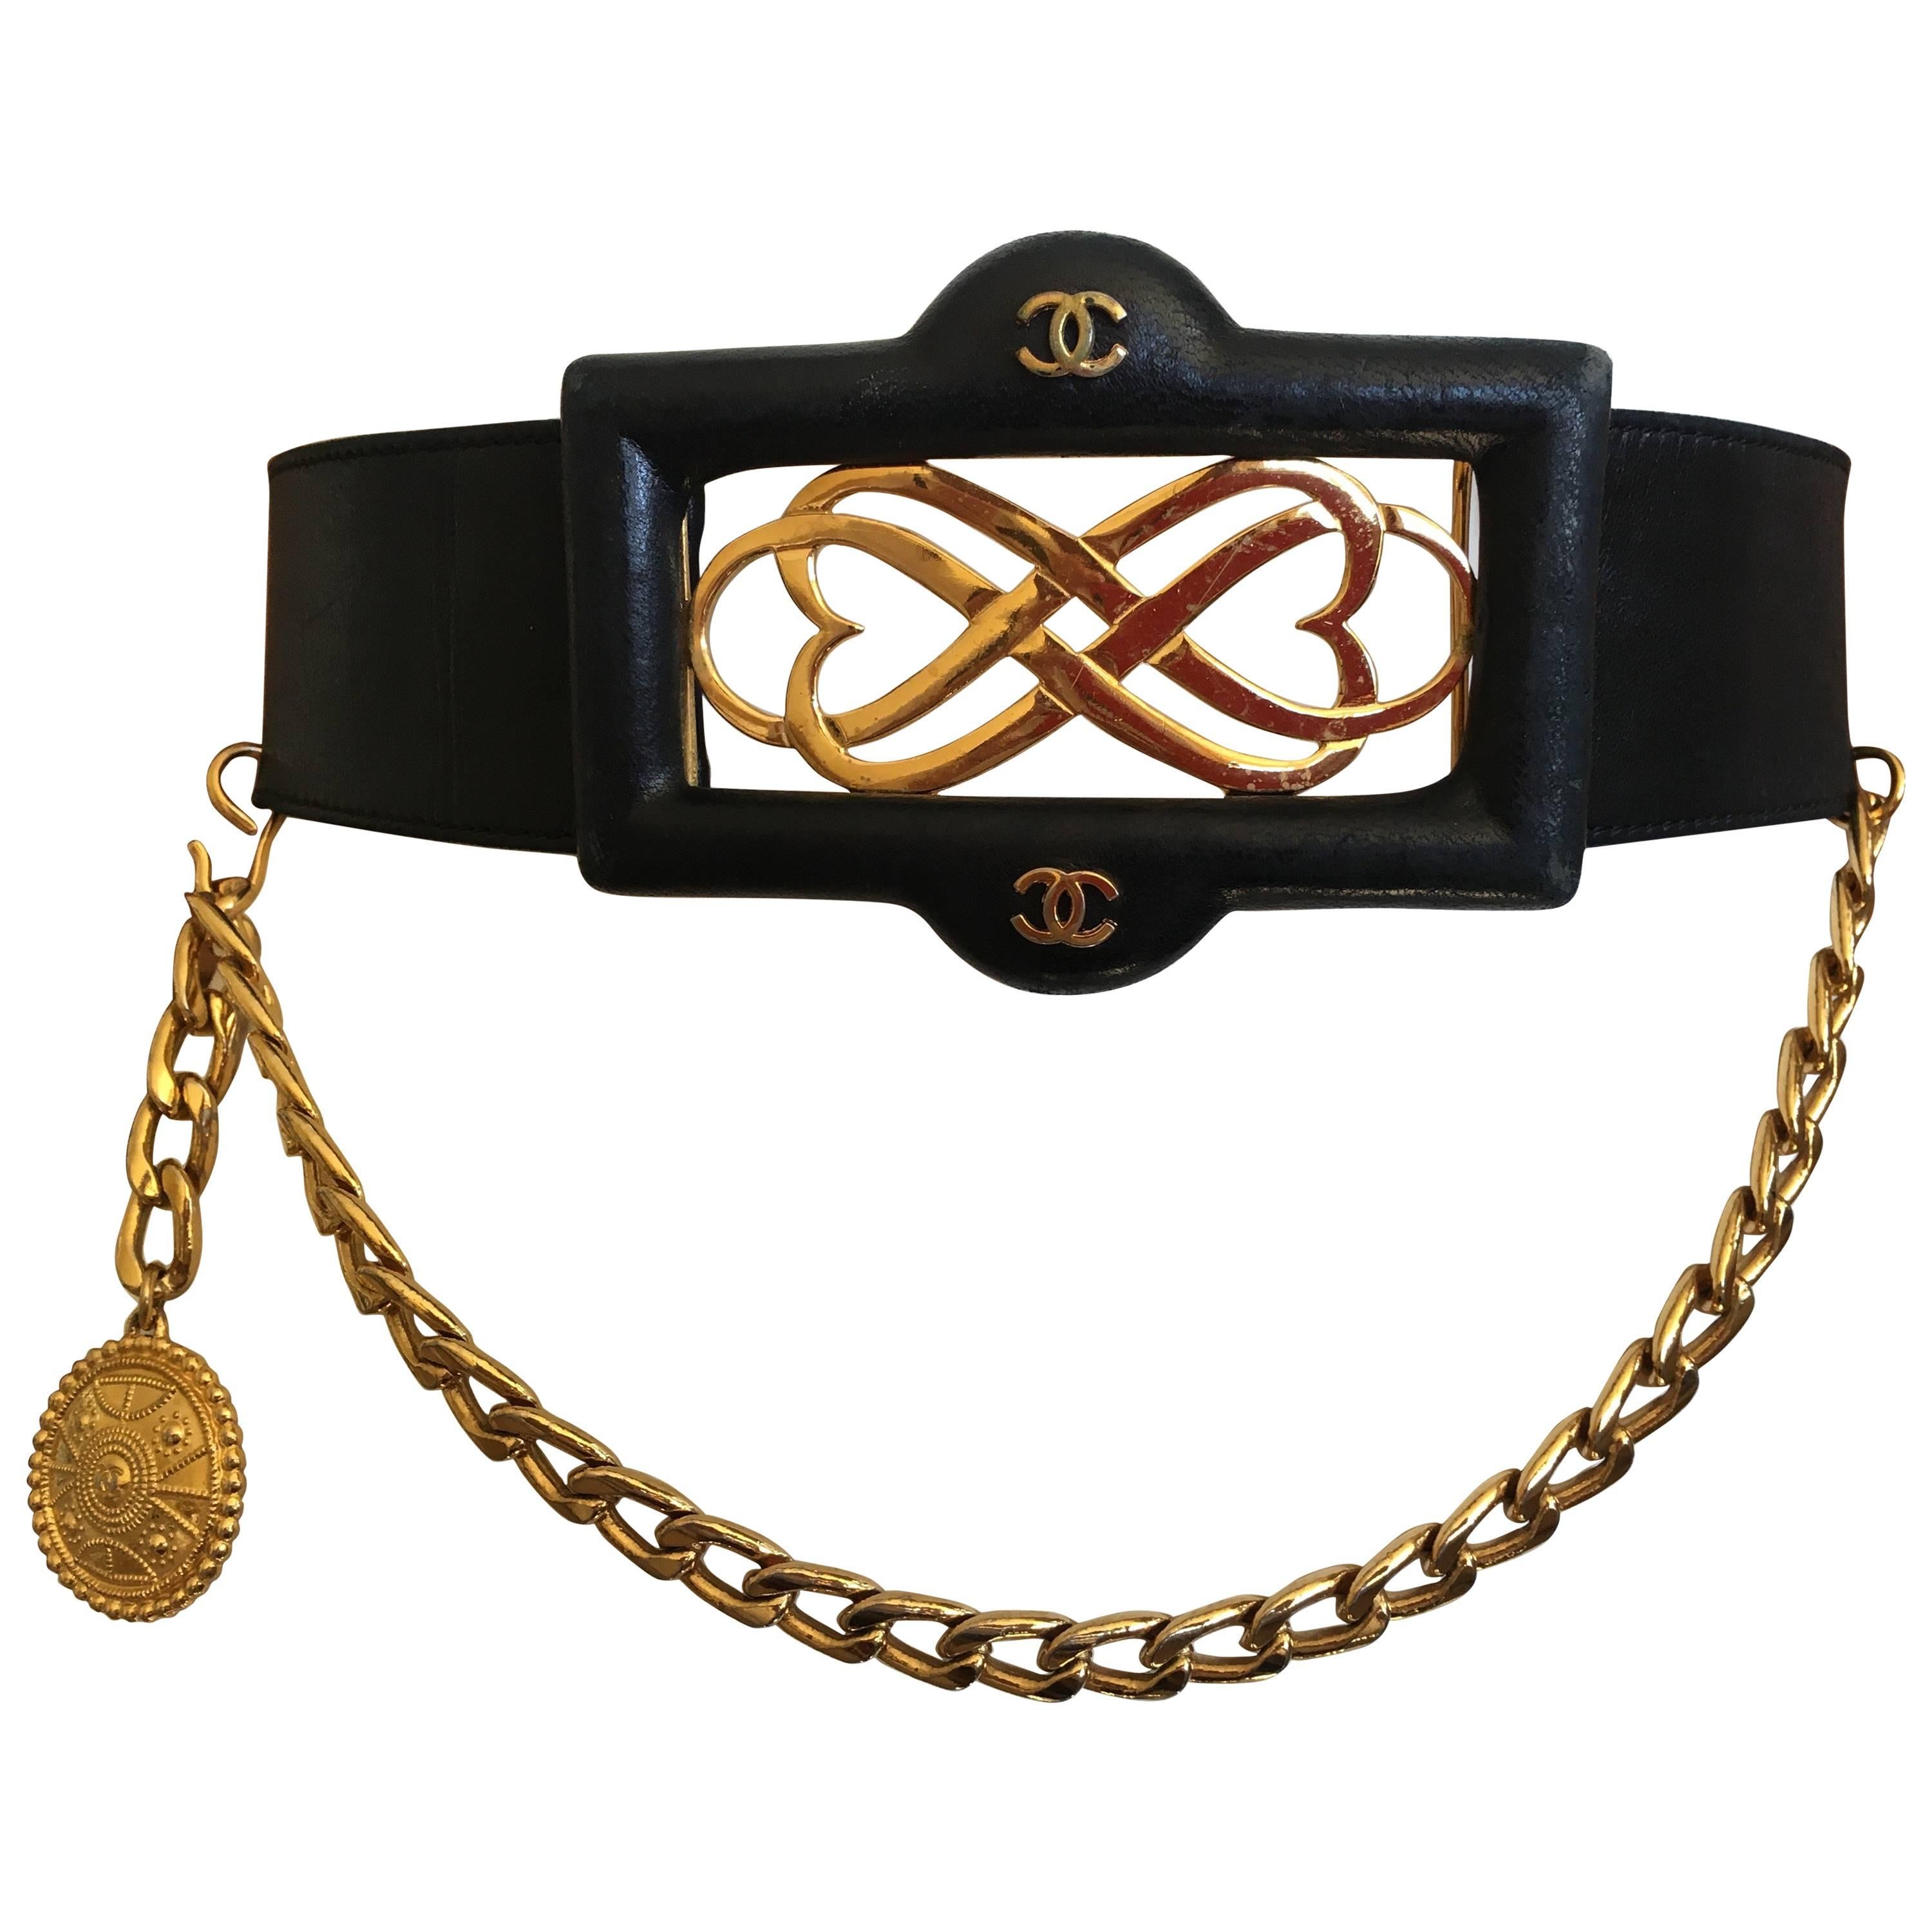 Chanel Vintage 1980's Wide Black Leather Belt with Chain